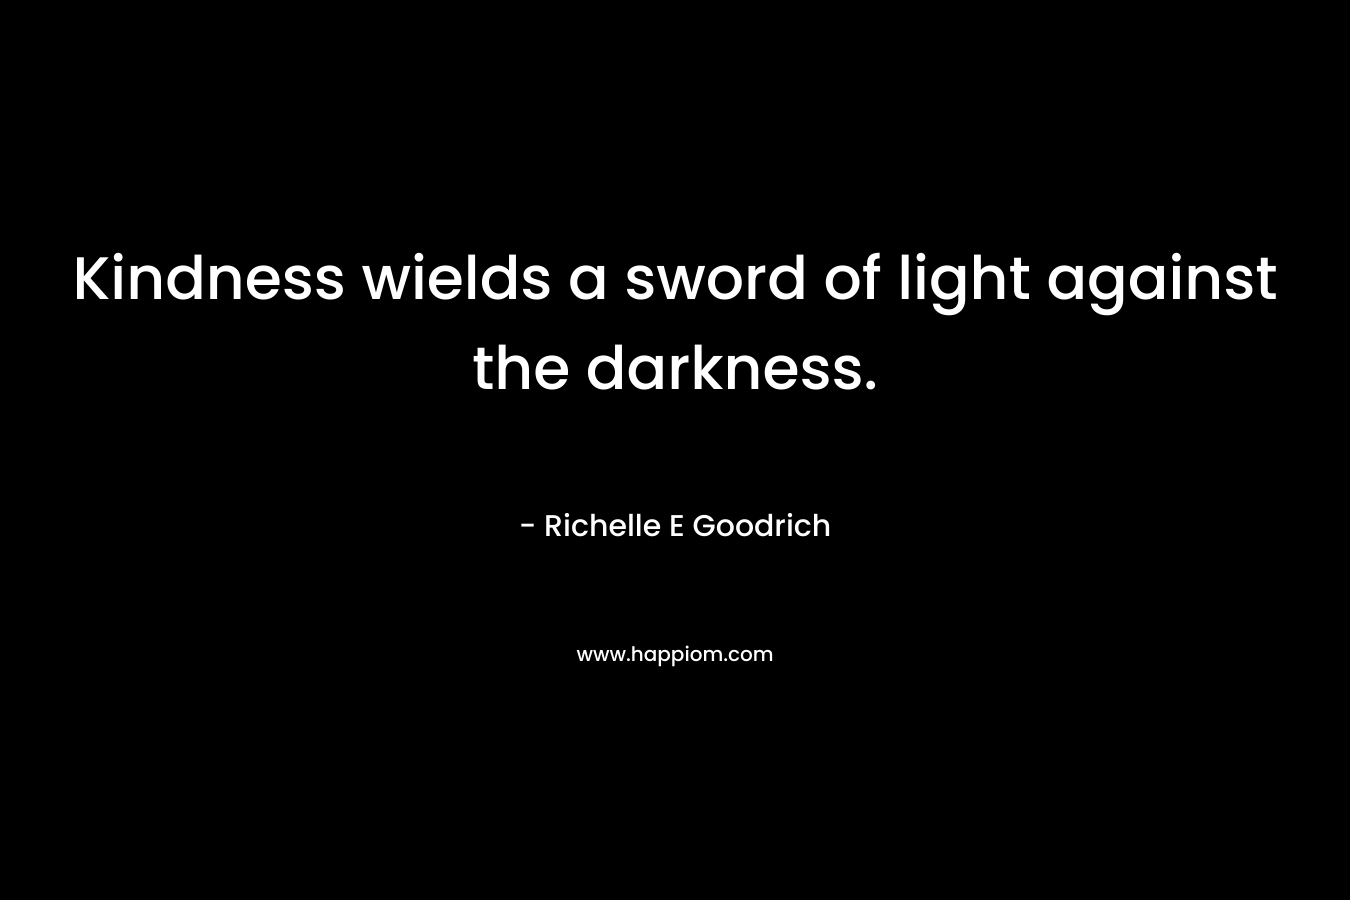 Kindness wields a sword of light against the darkness.